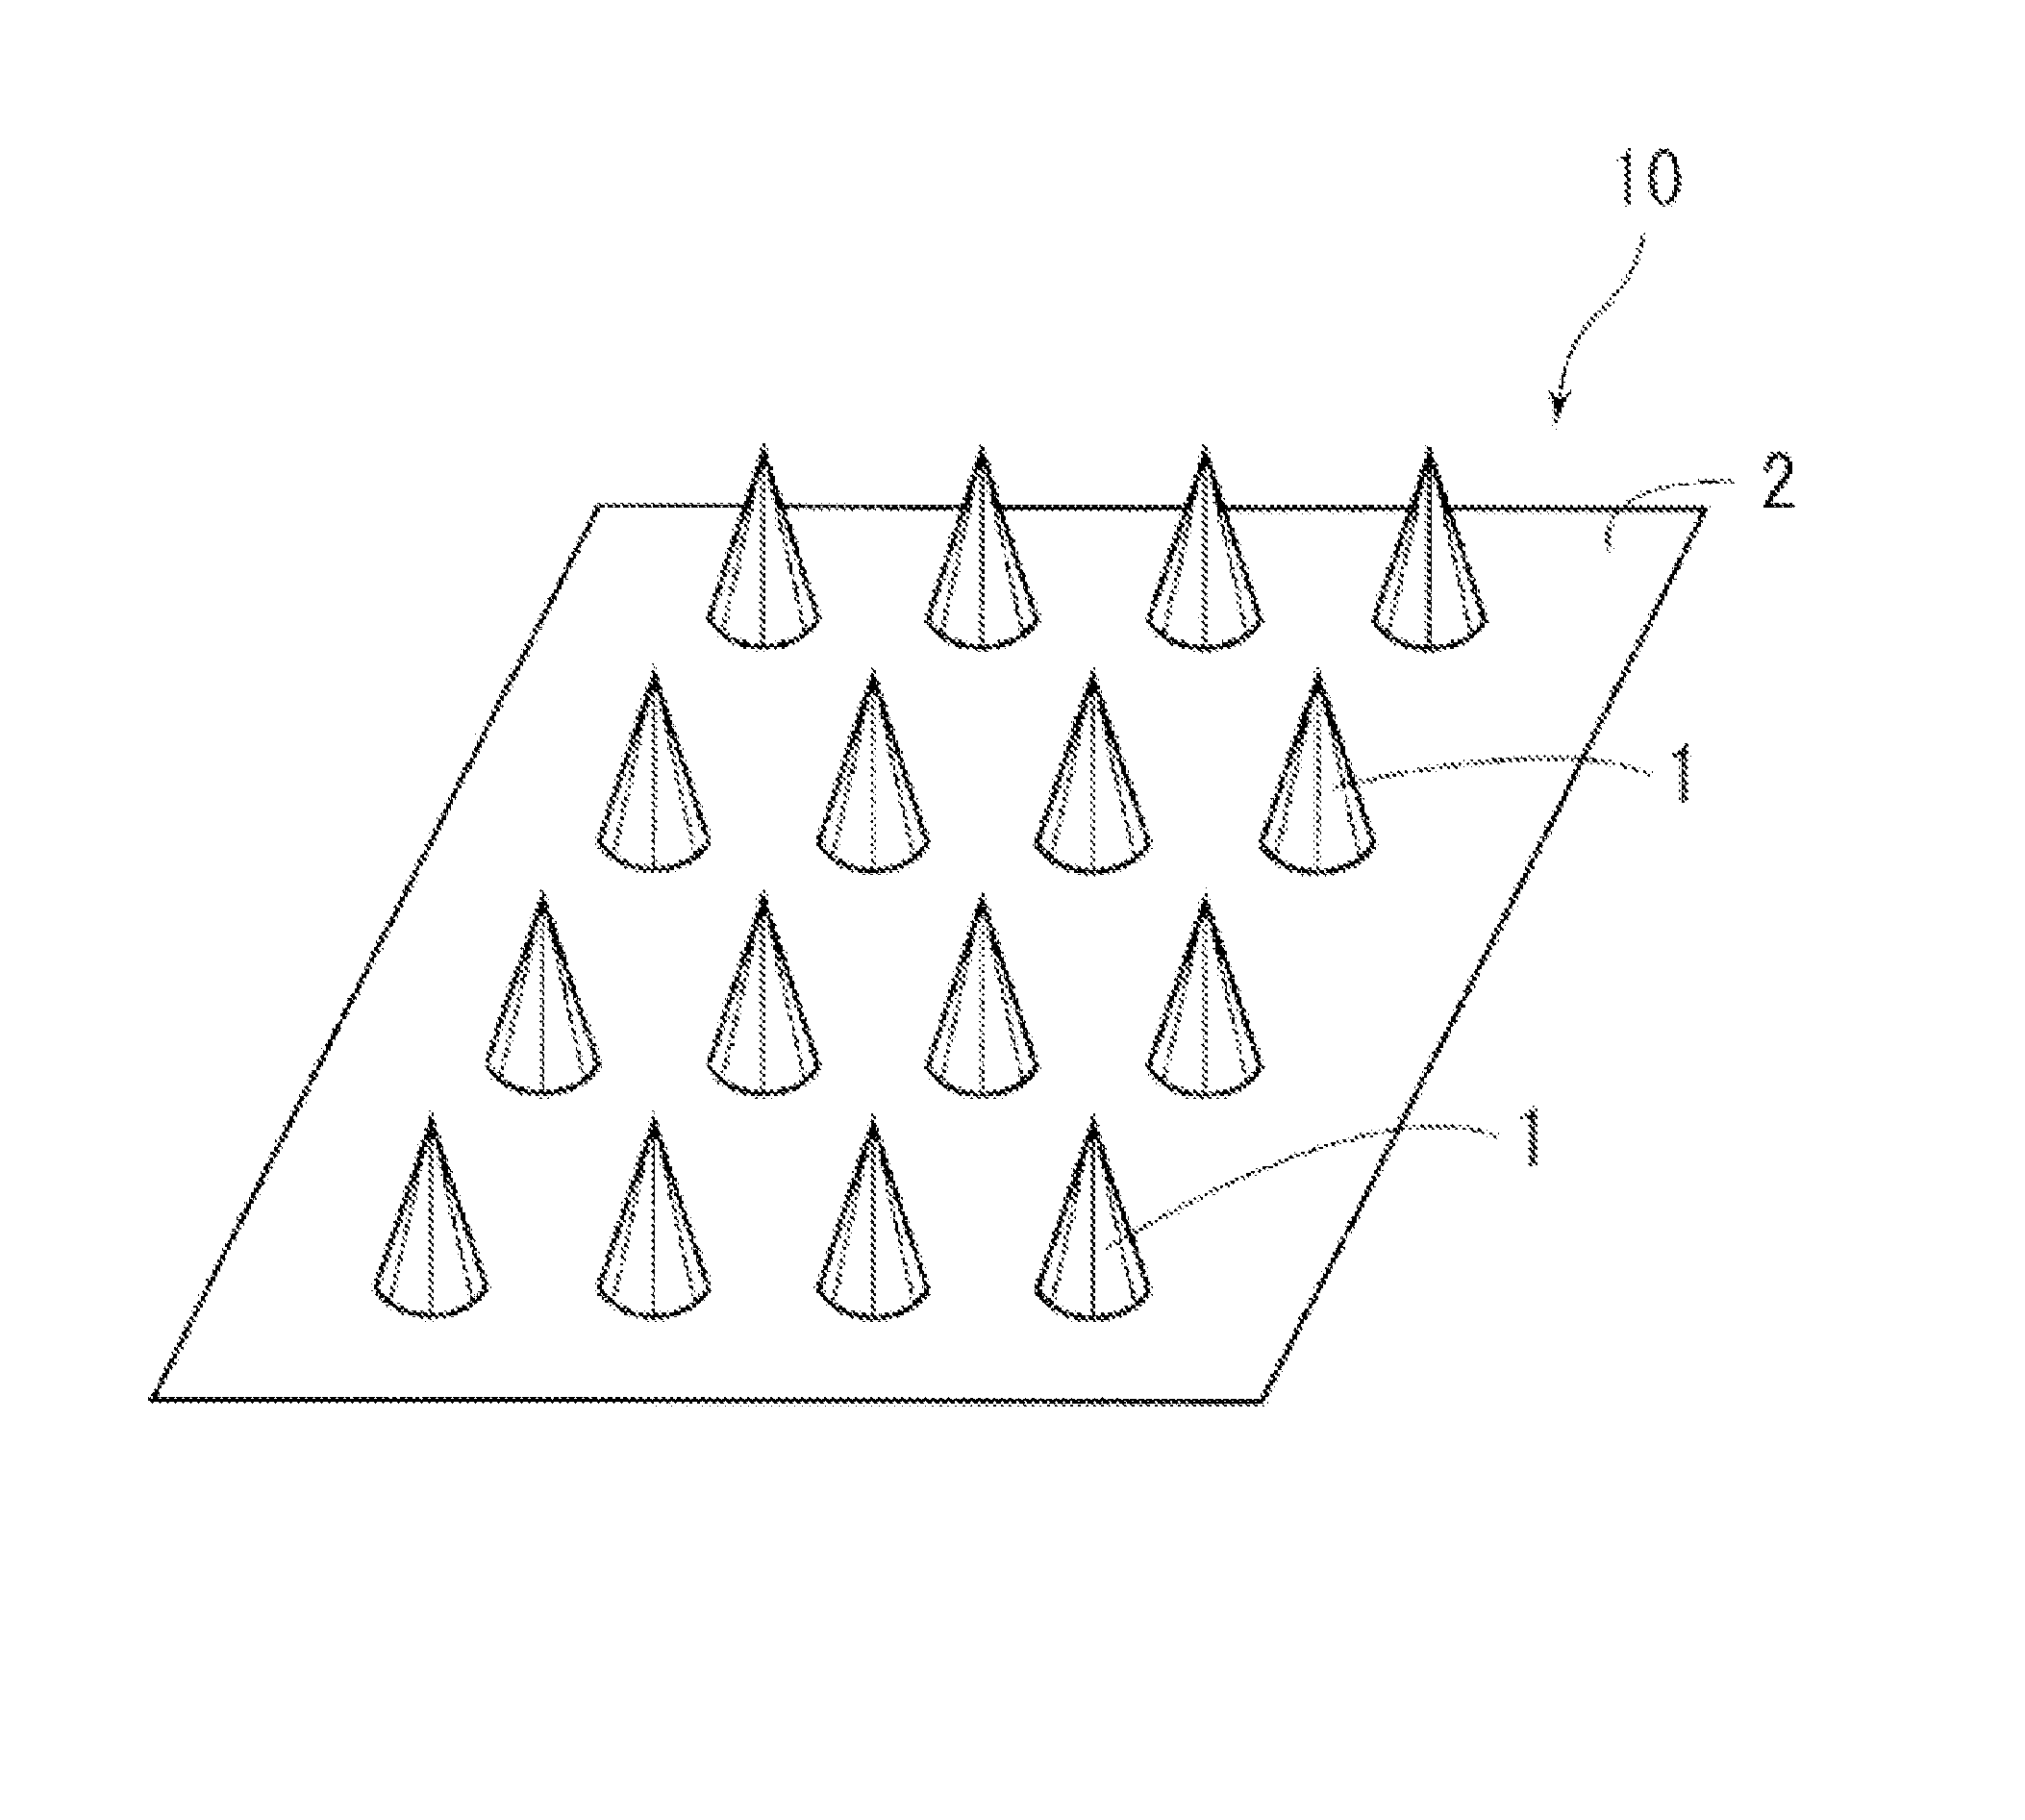 Dissolvable Microneedles Comprising One Or More Encapsulated Cosmetic Ingredients